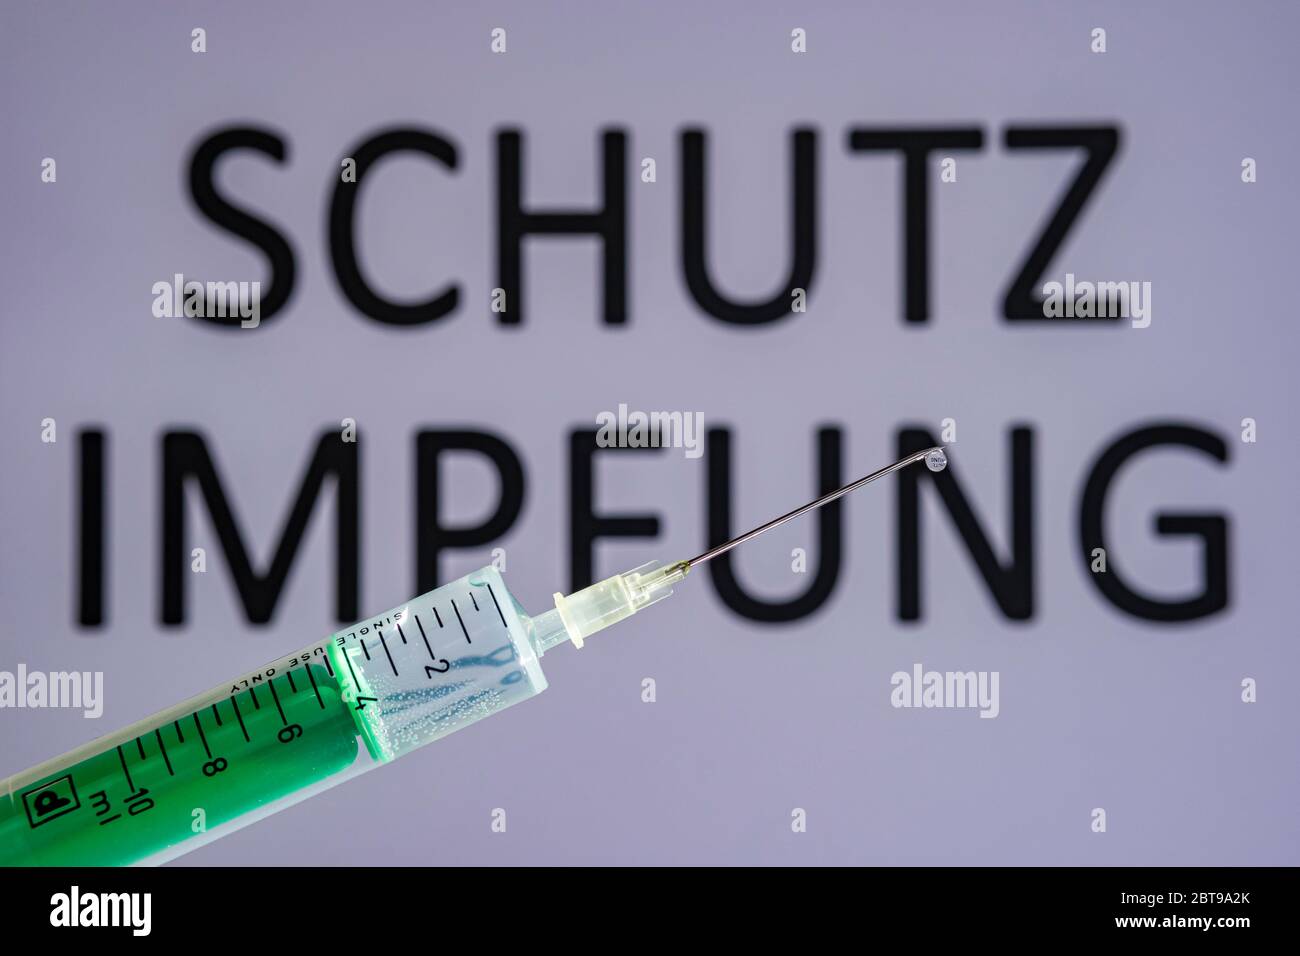 This photo illustration shows a disposable syringe with hypodermic needle, SCHUTZIMPFUNG written on a grey board behind Stock Photo